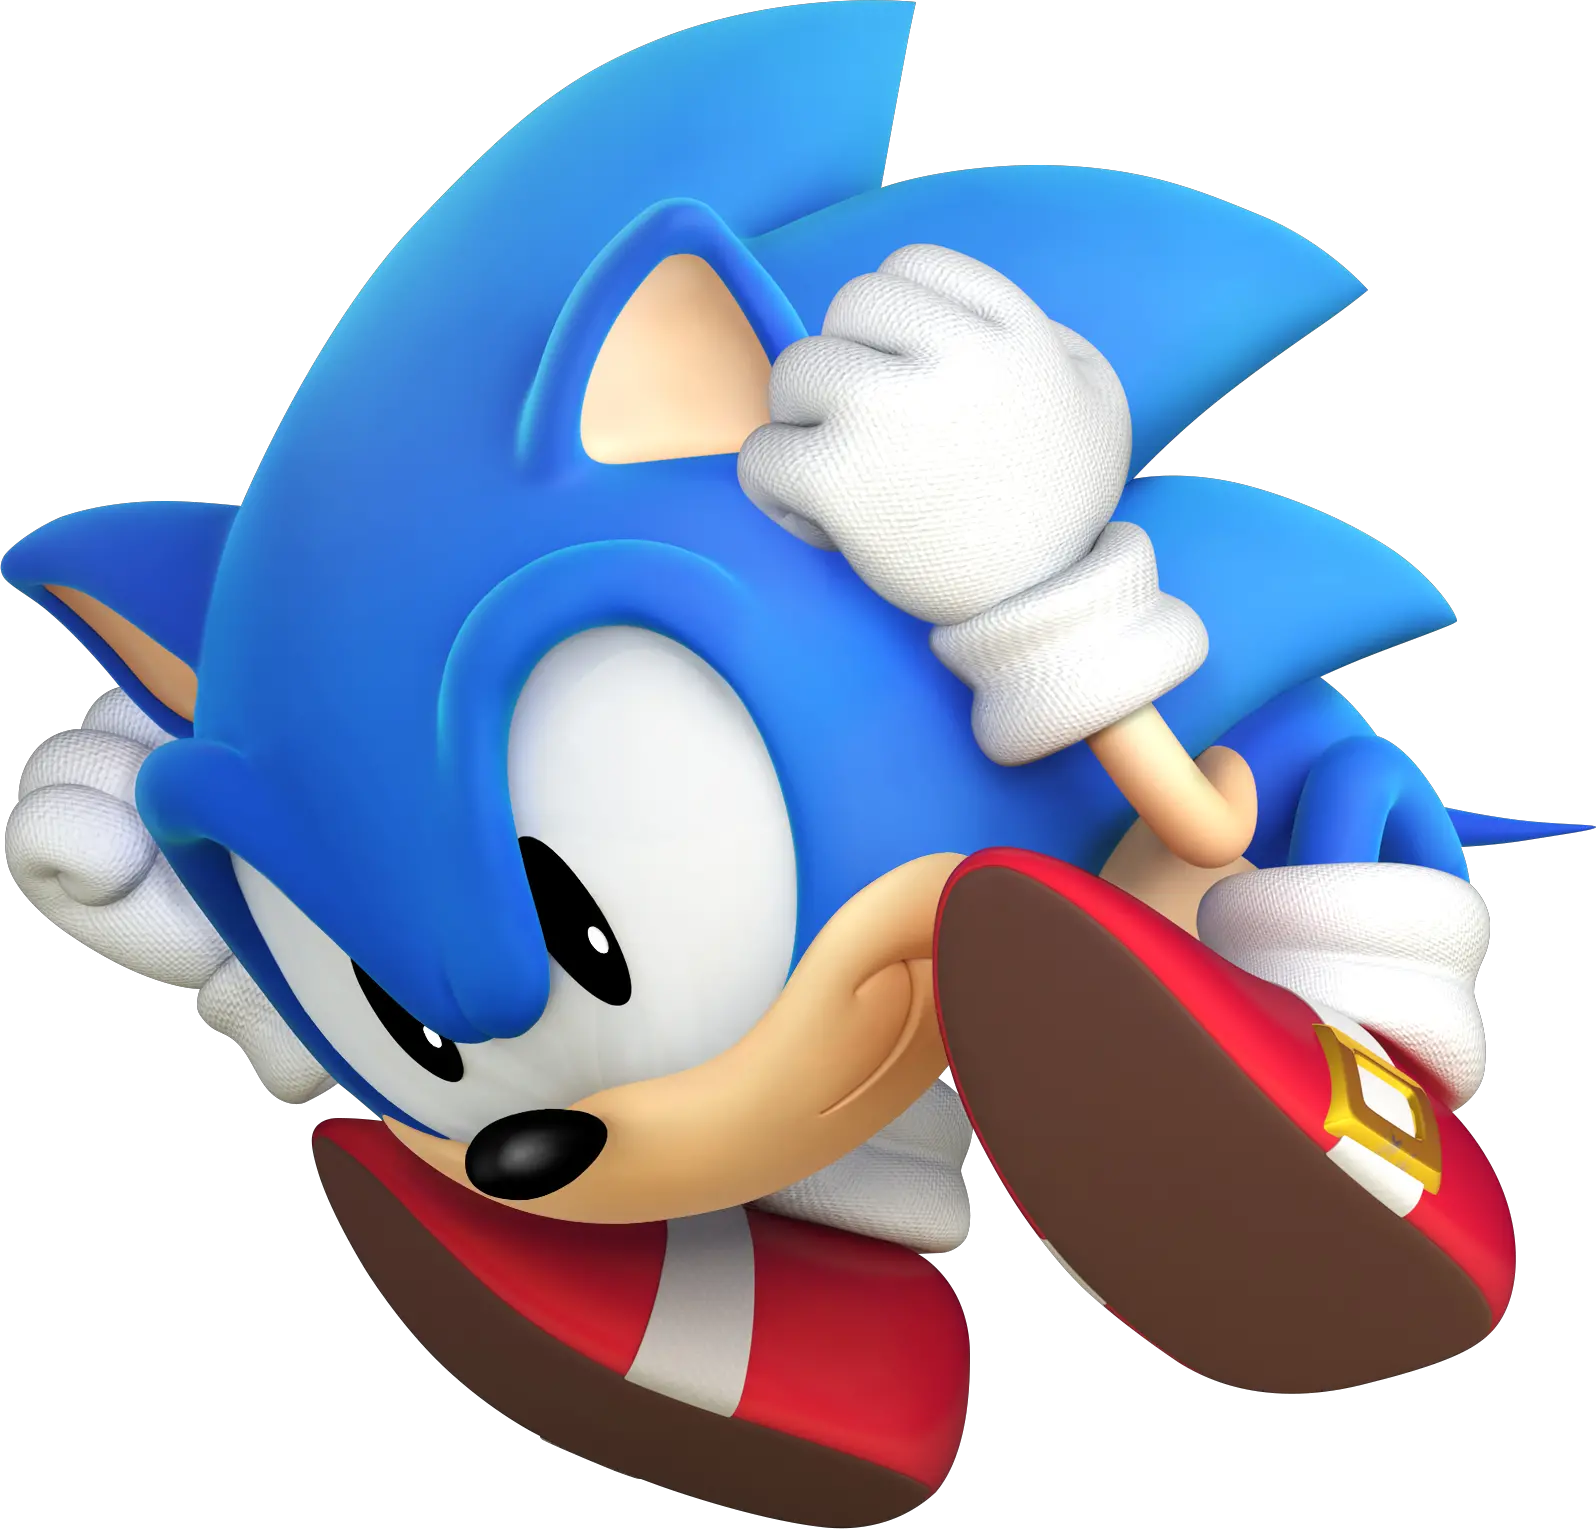 Download Sonic Knuckles Toy Dash Stuffed The Hedgehog Hq Png Sonic Generations Classic Sonic Knuckles Png